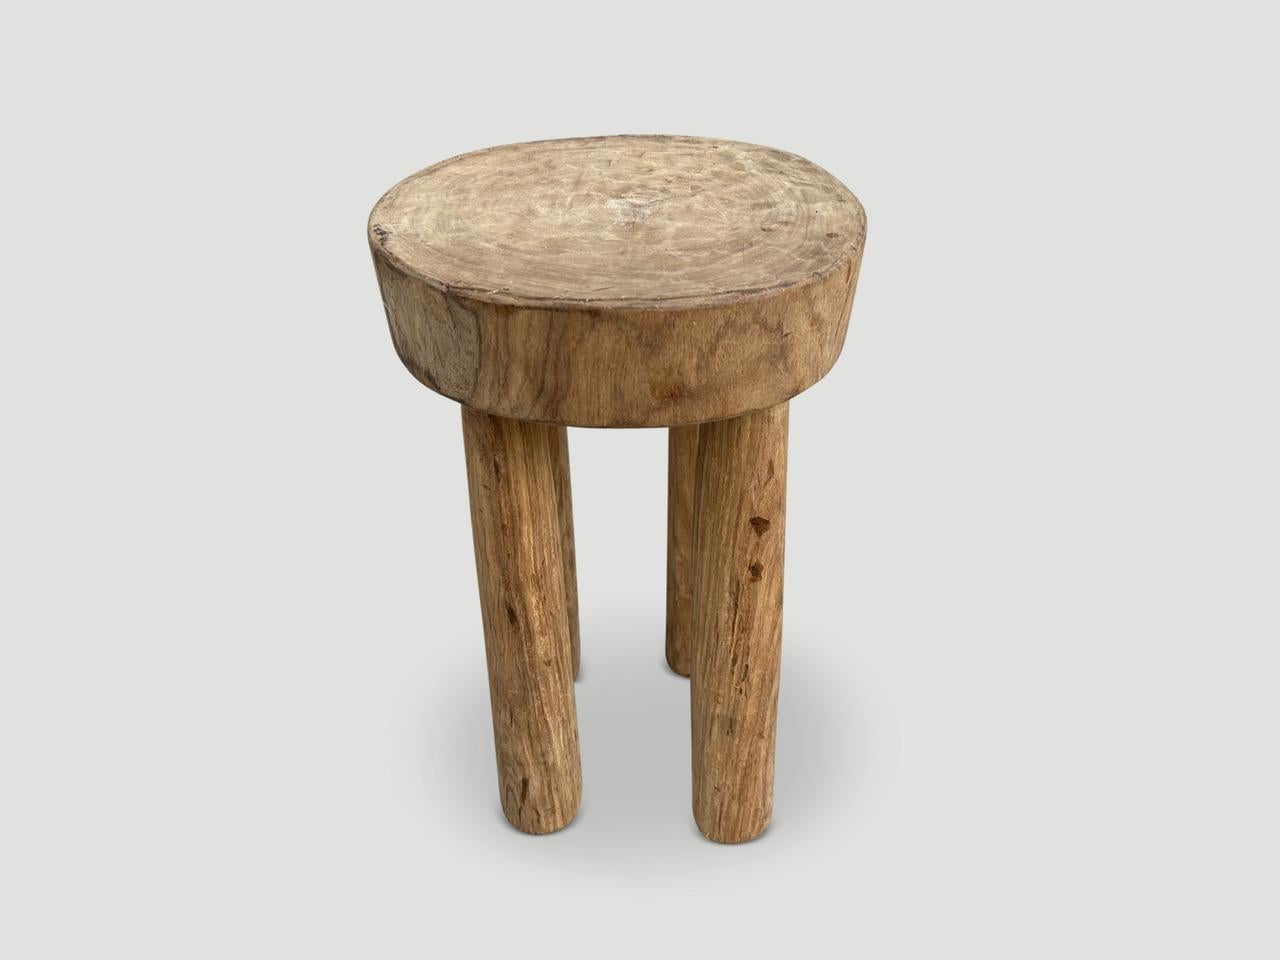 Ivorian Andrianna Shamaris Senufo Side Table or Stool From Côte d’Ivoire For Sale